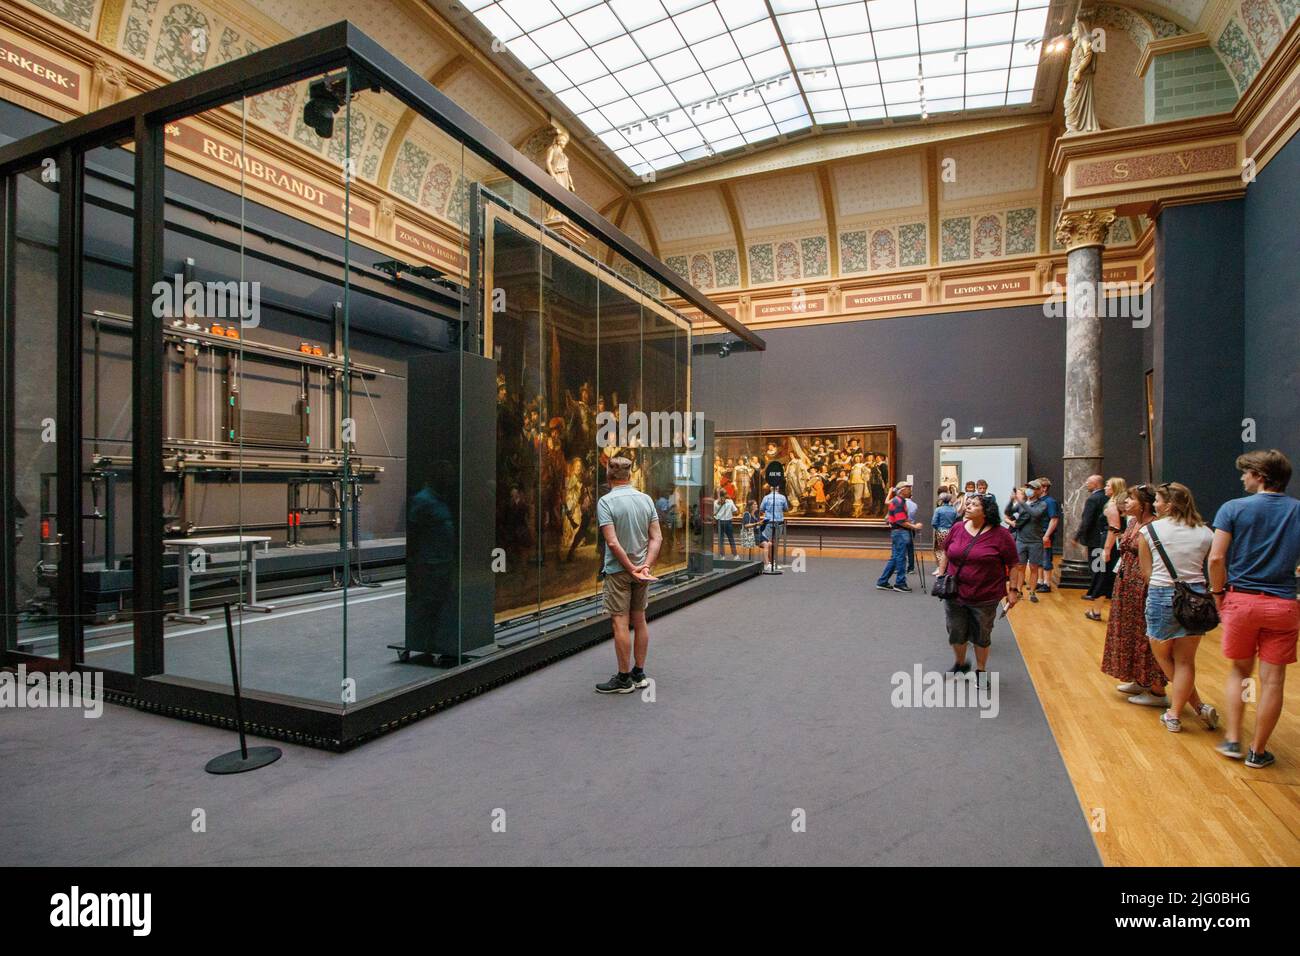 Visitors looking at the Rembrant The Rijksmuseum, Amsterdam. Stock Photo